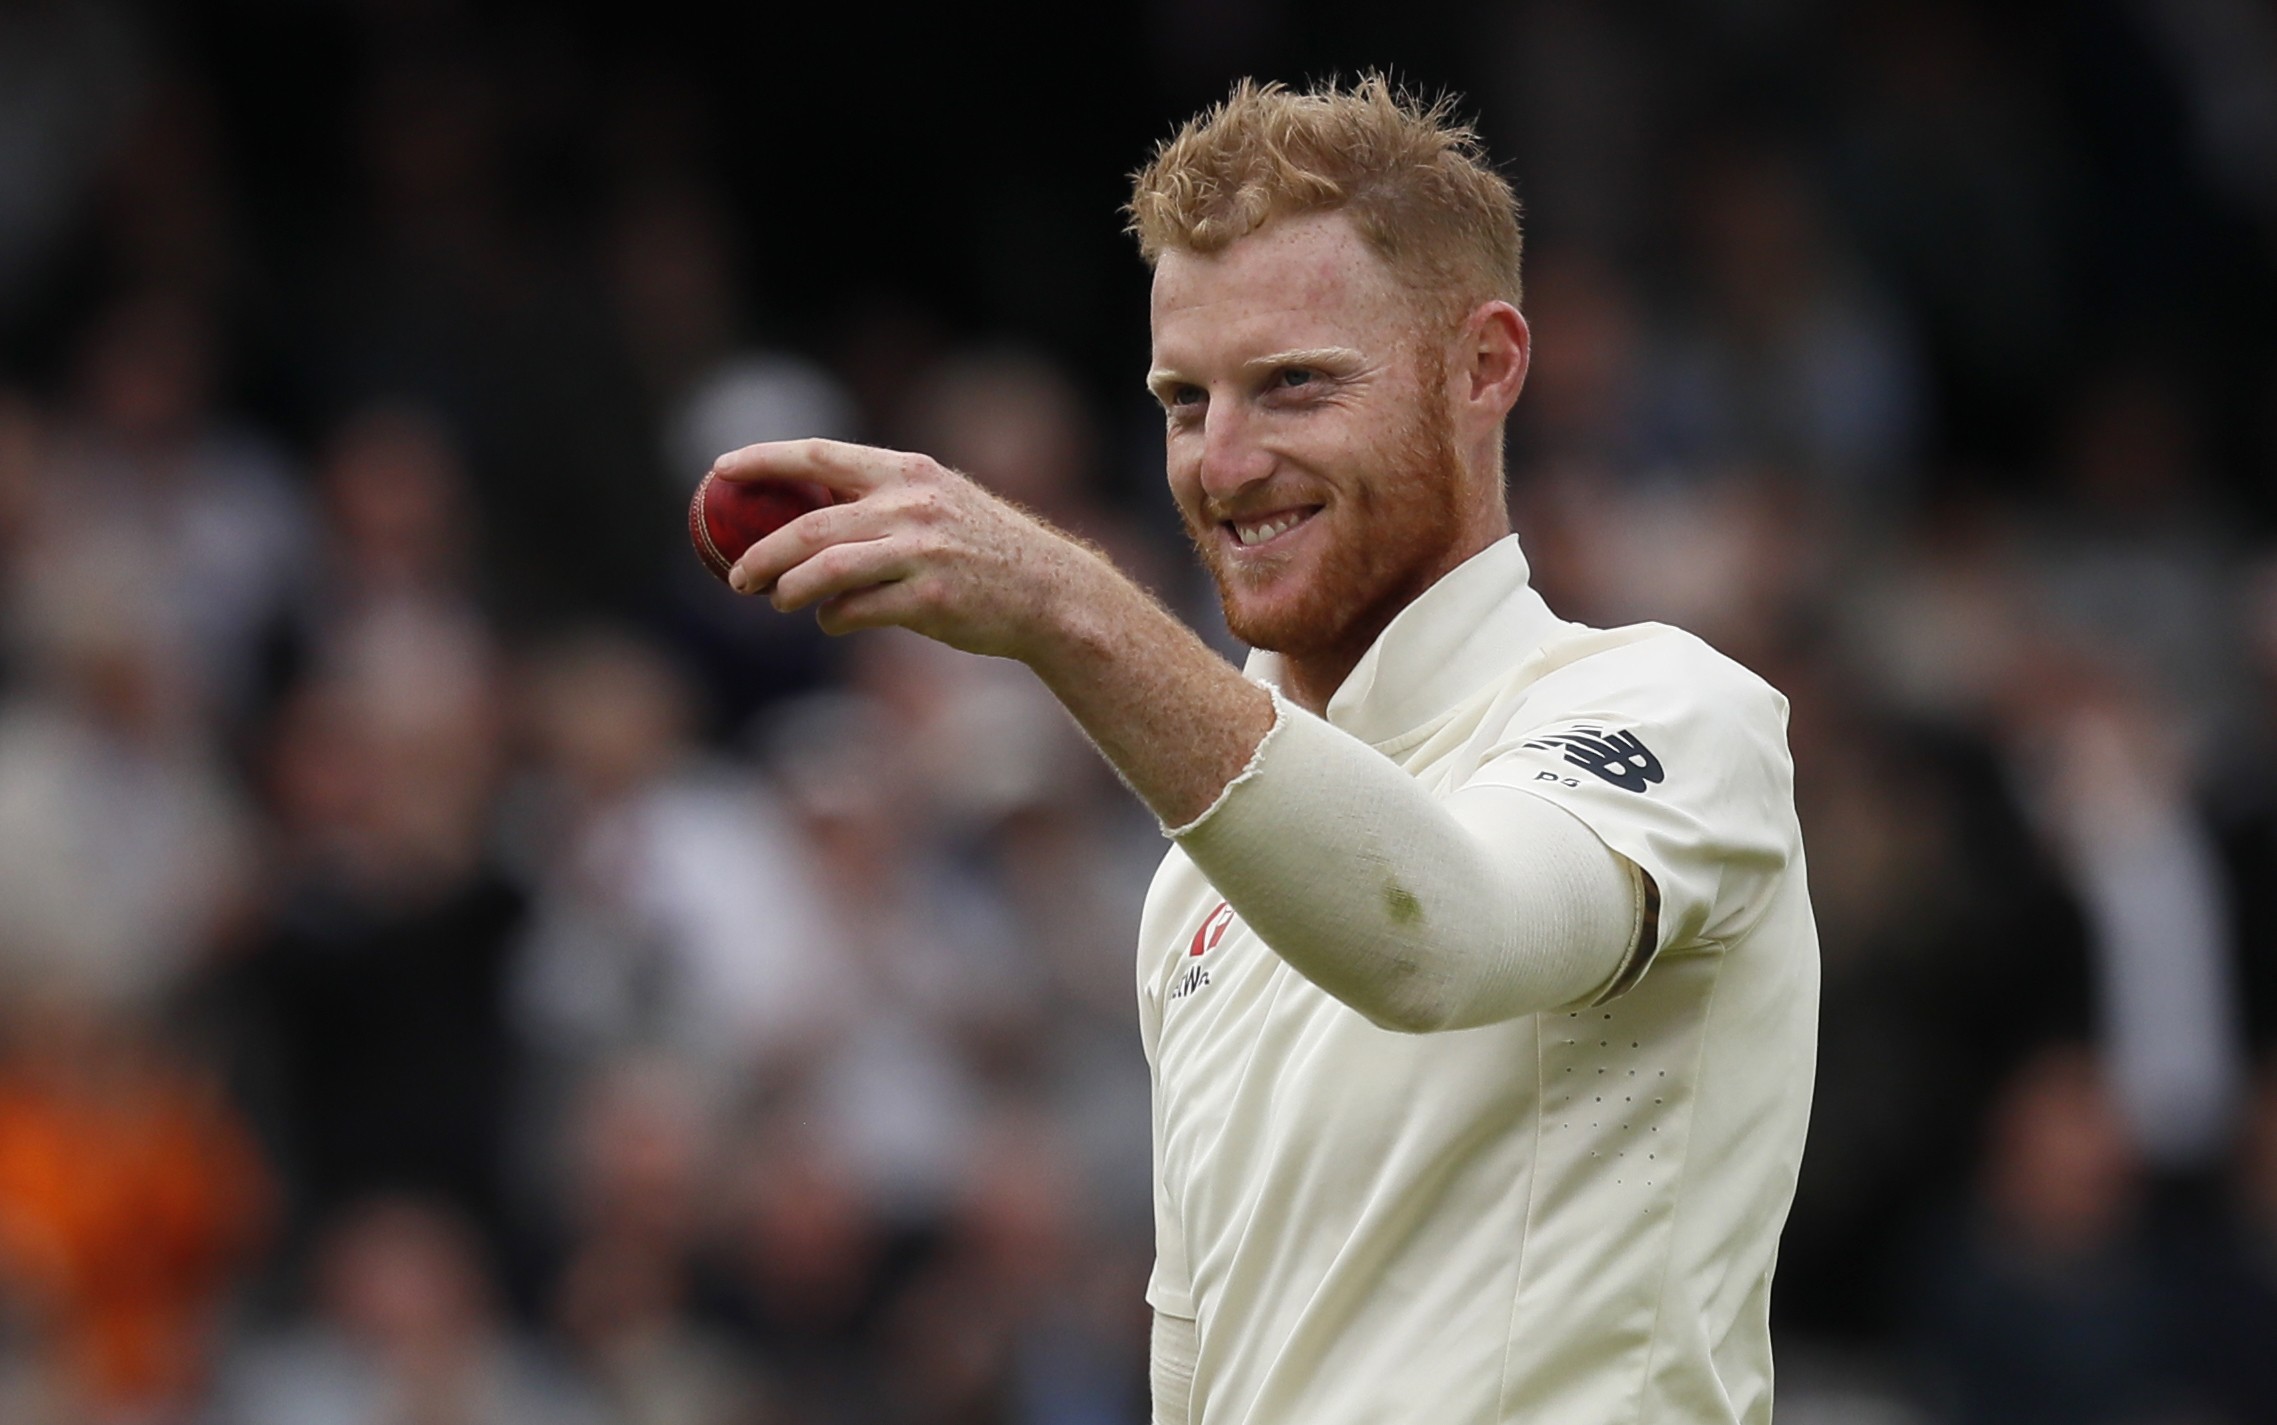 England all-rounder Ben Stokes could be in hot water after video surfaced of his assault on two men. Photo: AP